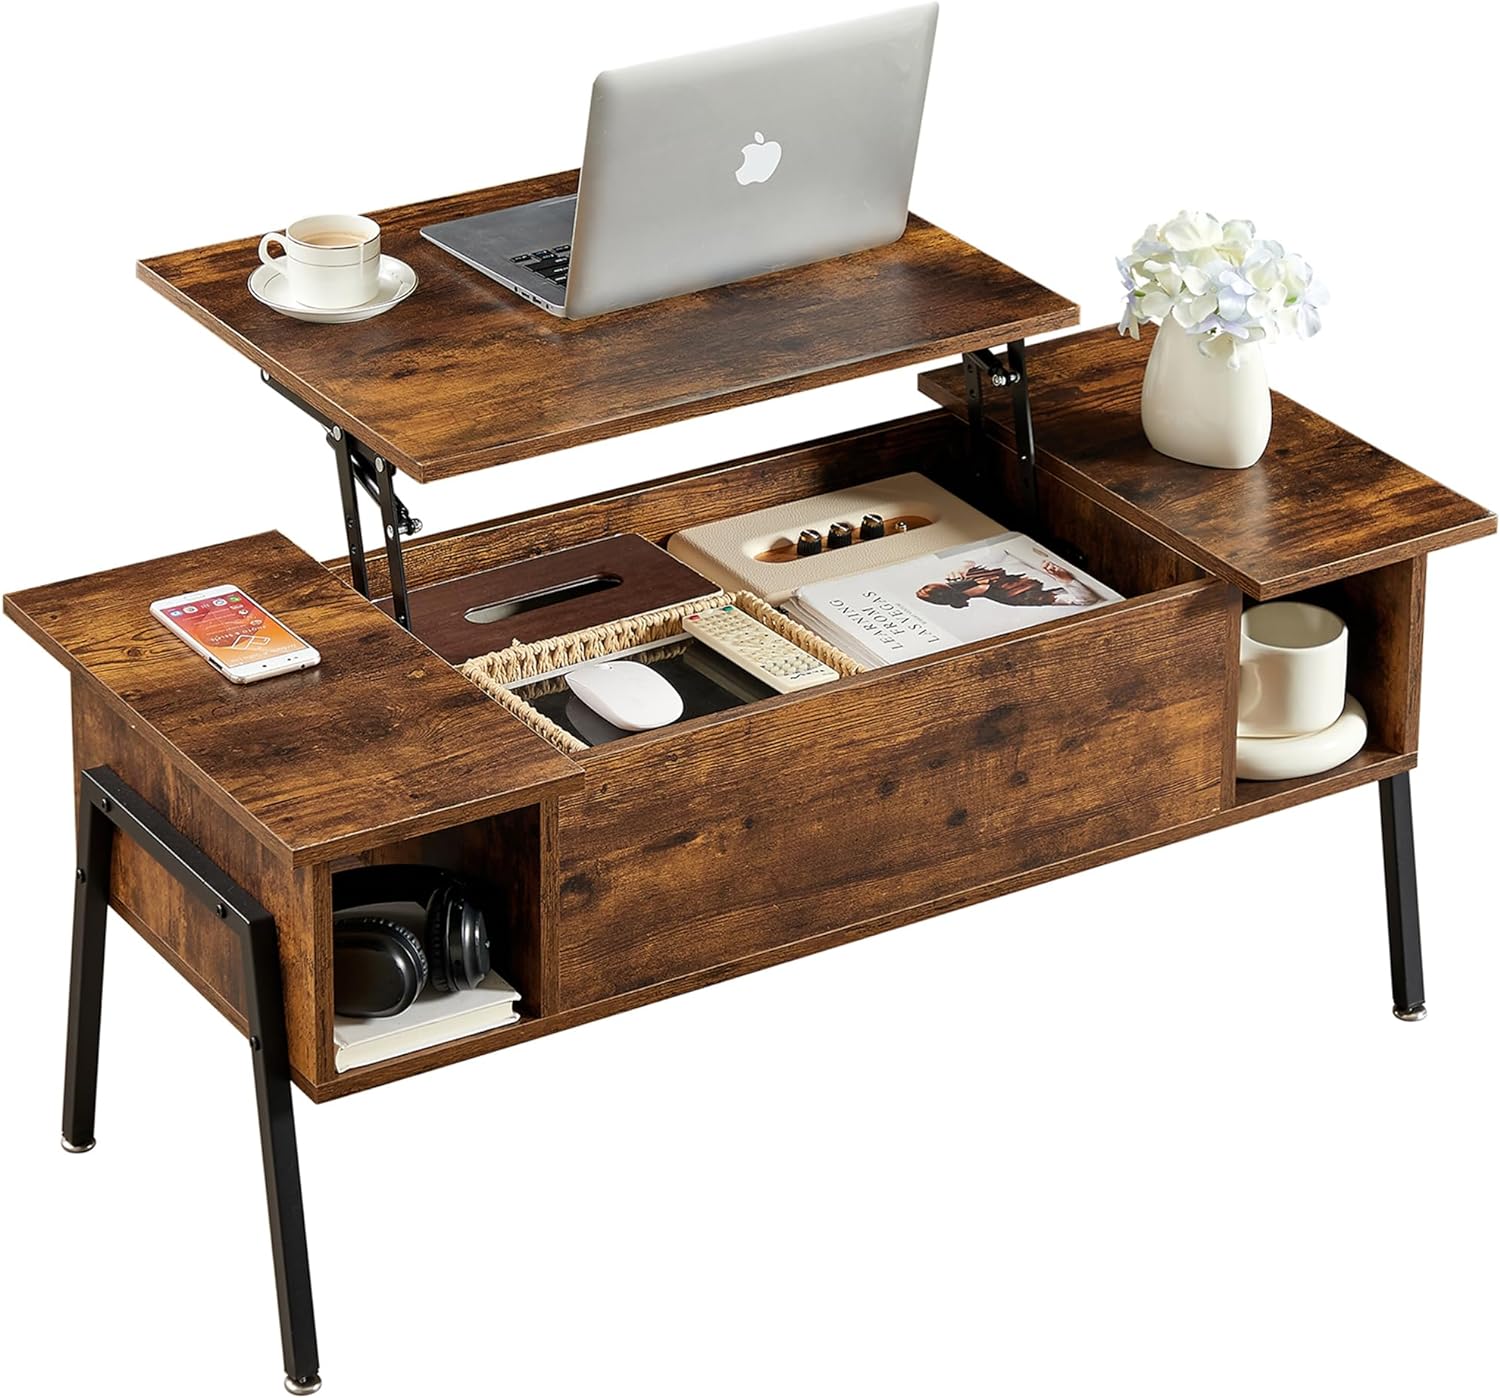 VECELO Wood Lift Top Coffee Table with Hidden Compartment and Storage Shelf